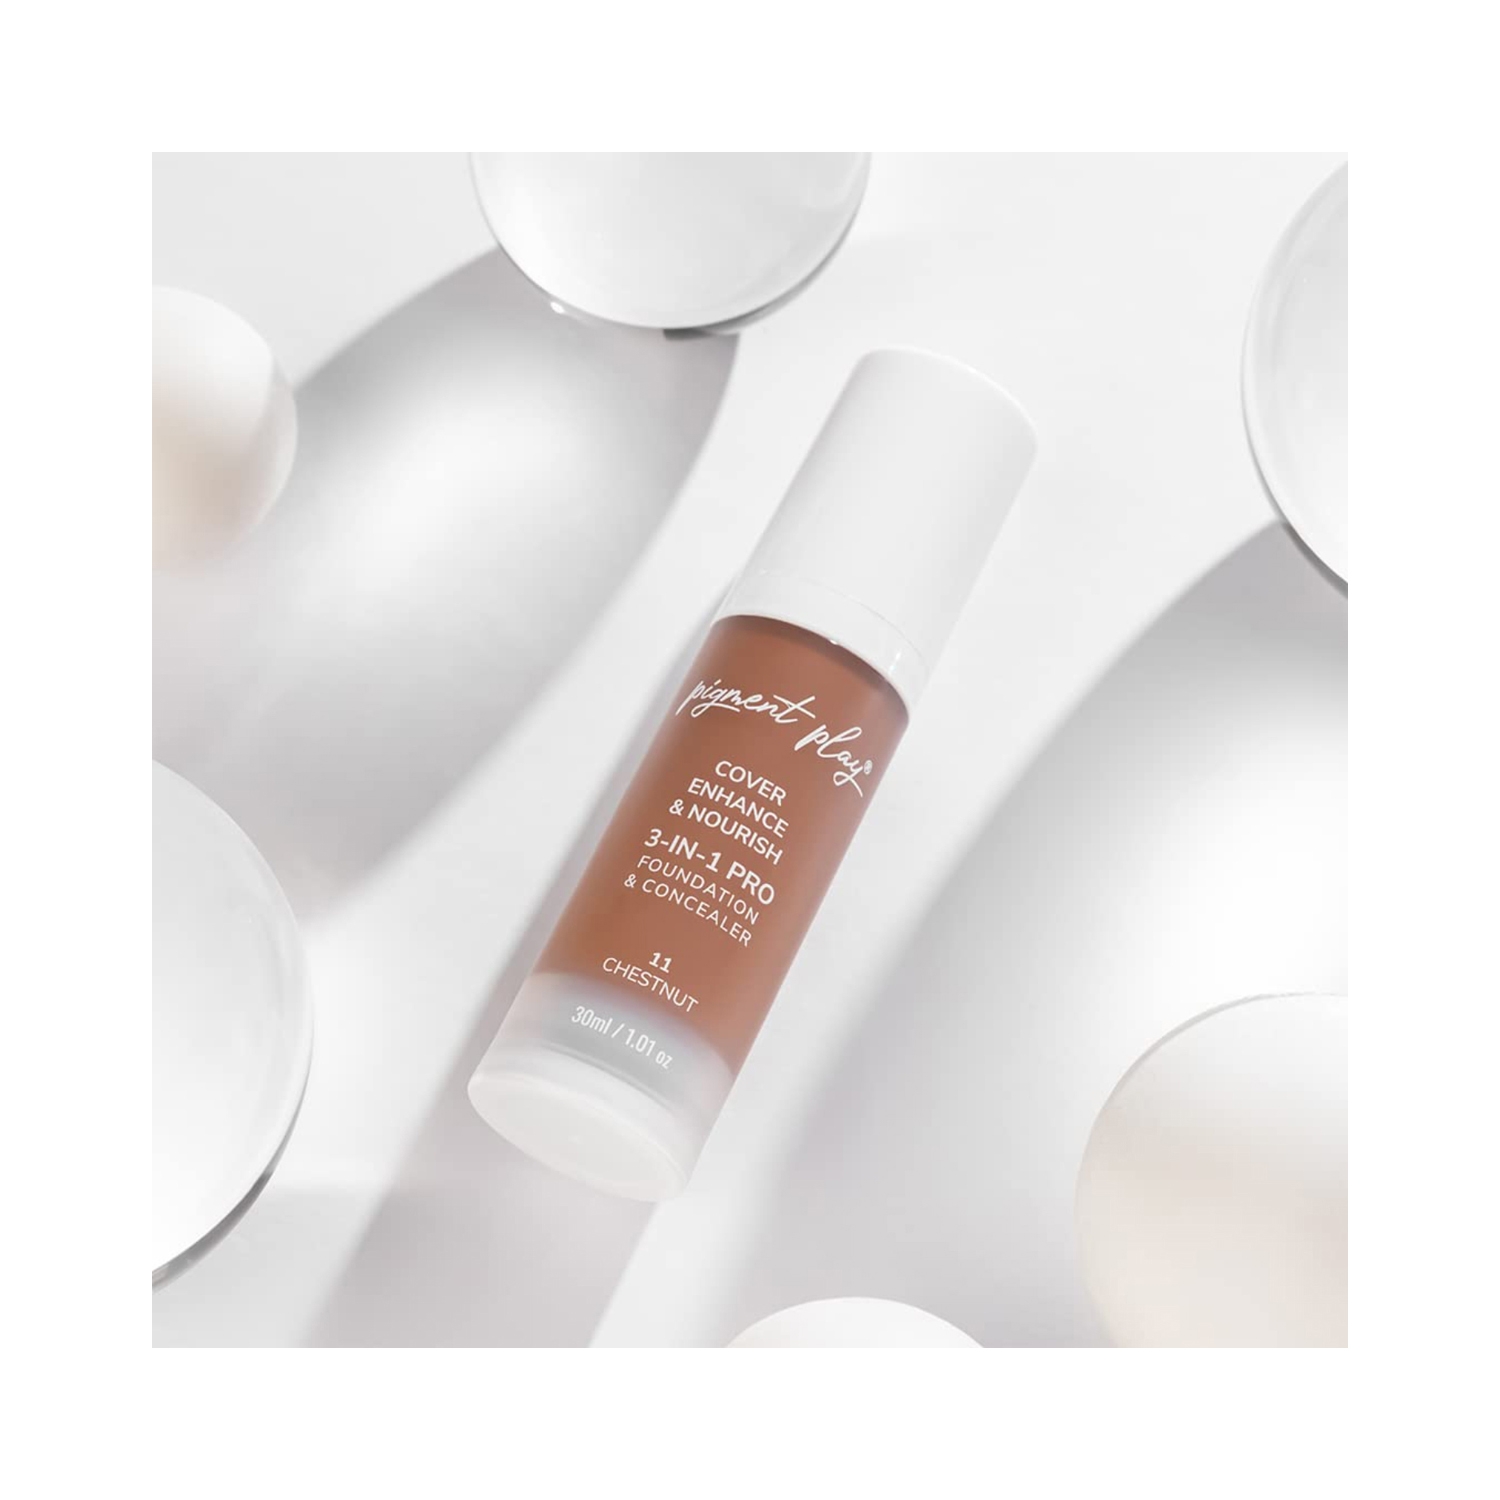 Pigment Play | Pigment Play 3-in-1 Cover + Enhance + Nourish Foundation & Concealer - 11 Chestnut (30ml)